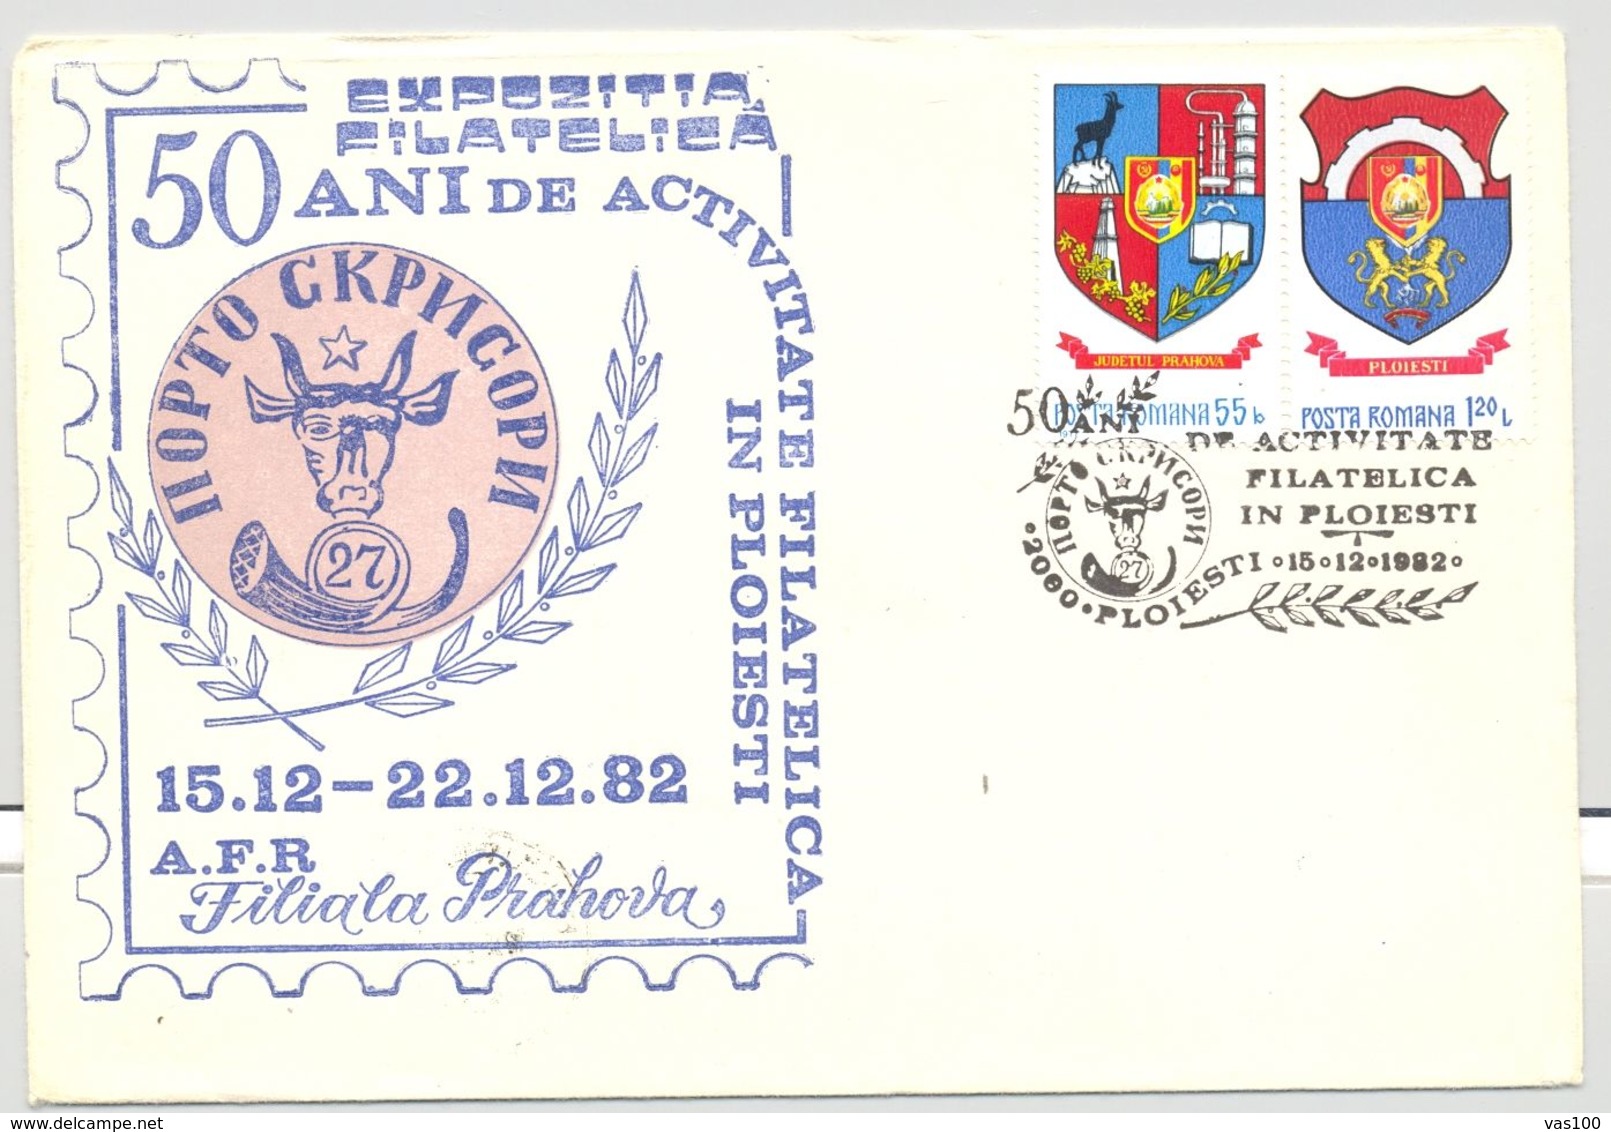 PLOIESTI PHILATELIC CLUB ANNIVERSARY, COAT OF ARMS STAMPS, SPECIAL COVER, 1982, ROMANIA - Lettres & Documents